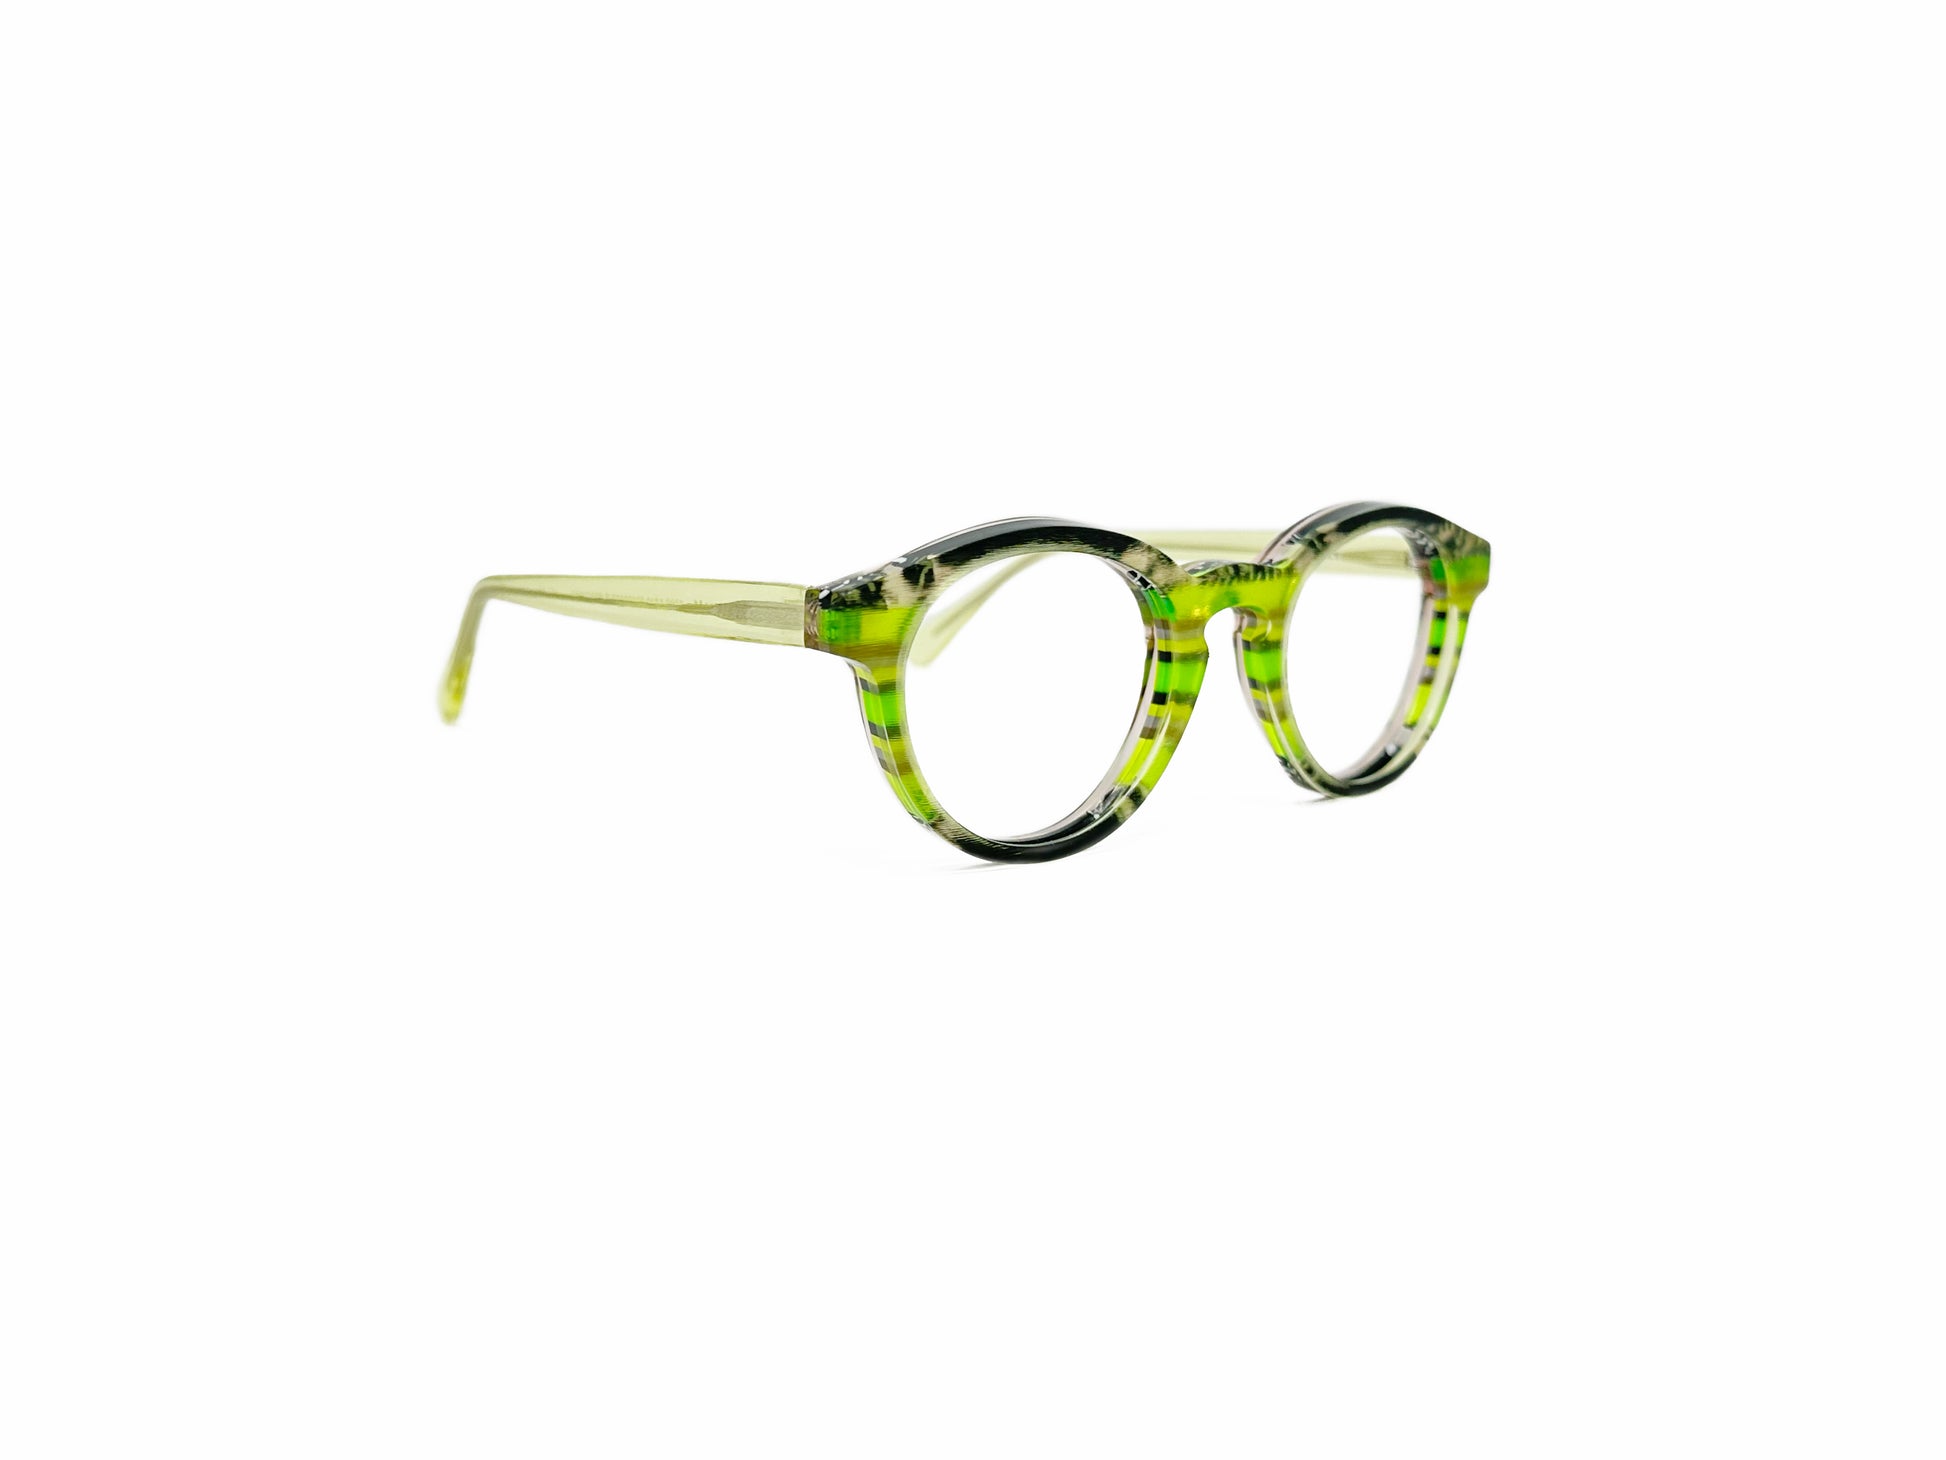 Viktlos round acetate optical frame with keyhole bridge. Model: 3058M. Color: 3333- Green stripes with slight marble pattern. Side view.